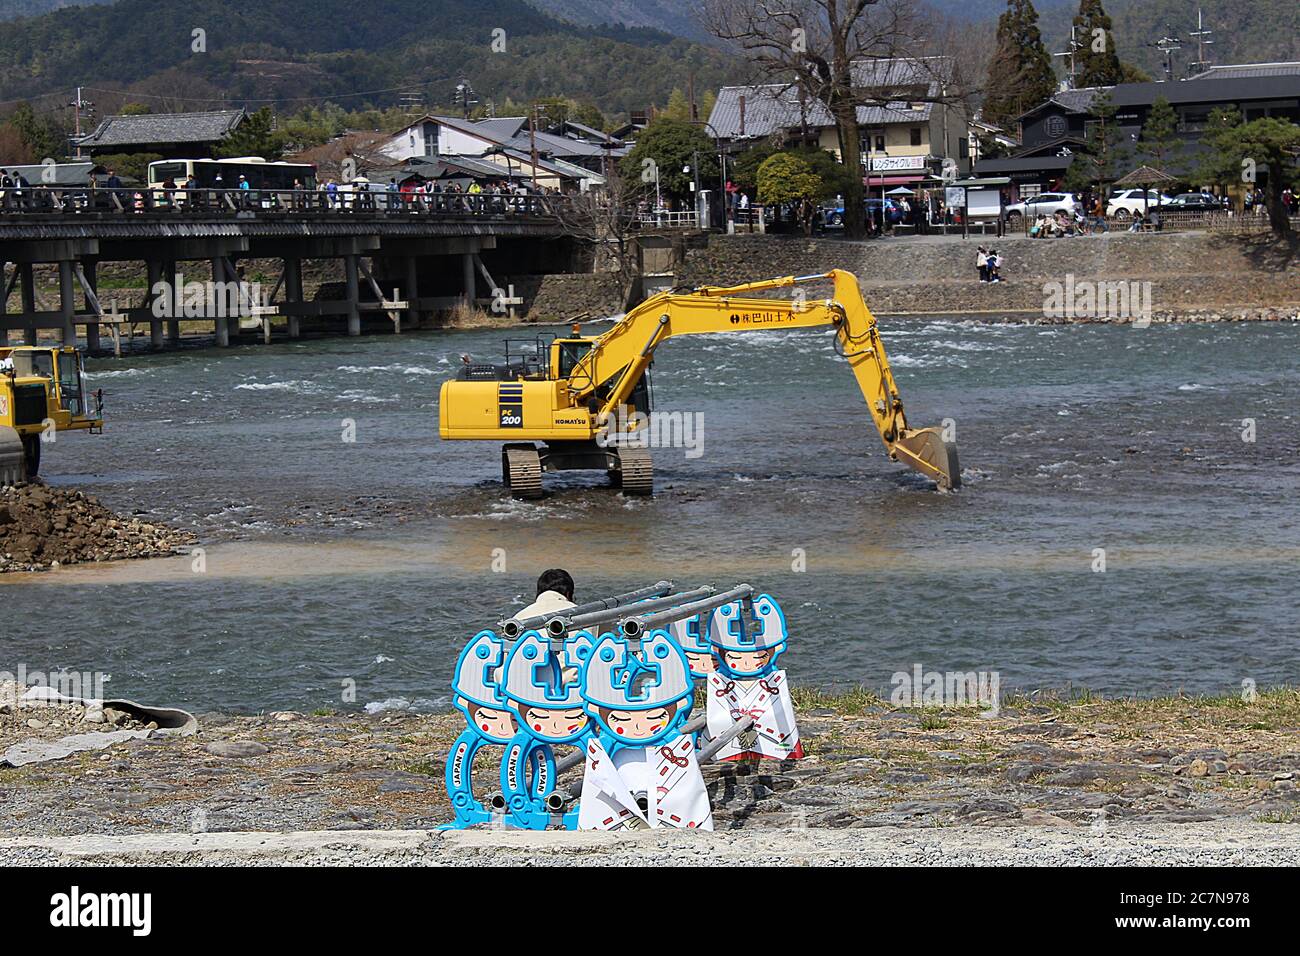 Construction side at Kamo river, Kyoto with cute comic construction barriers and beyond an excavator in the river and people walking over bridge. Stock Photo